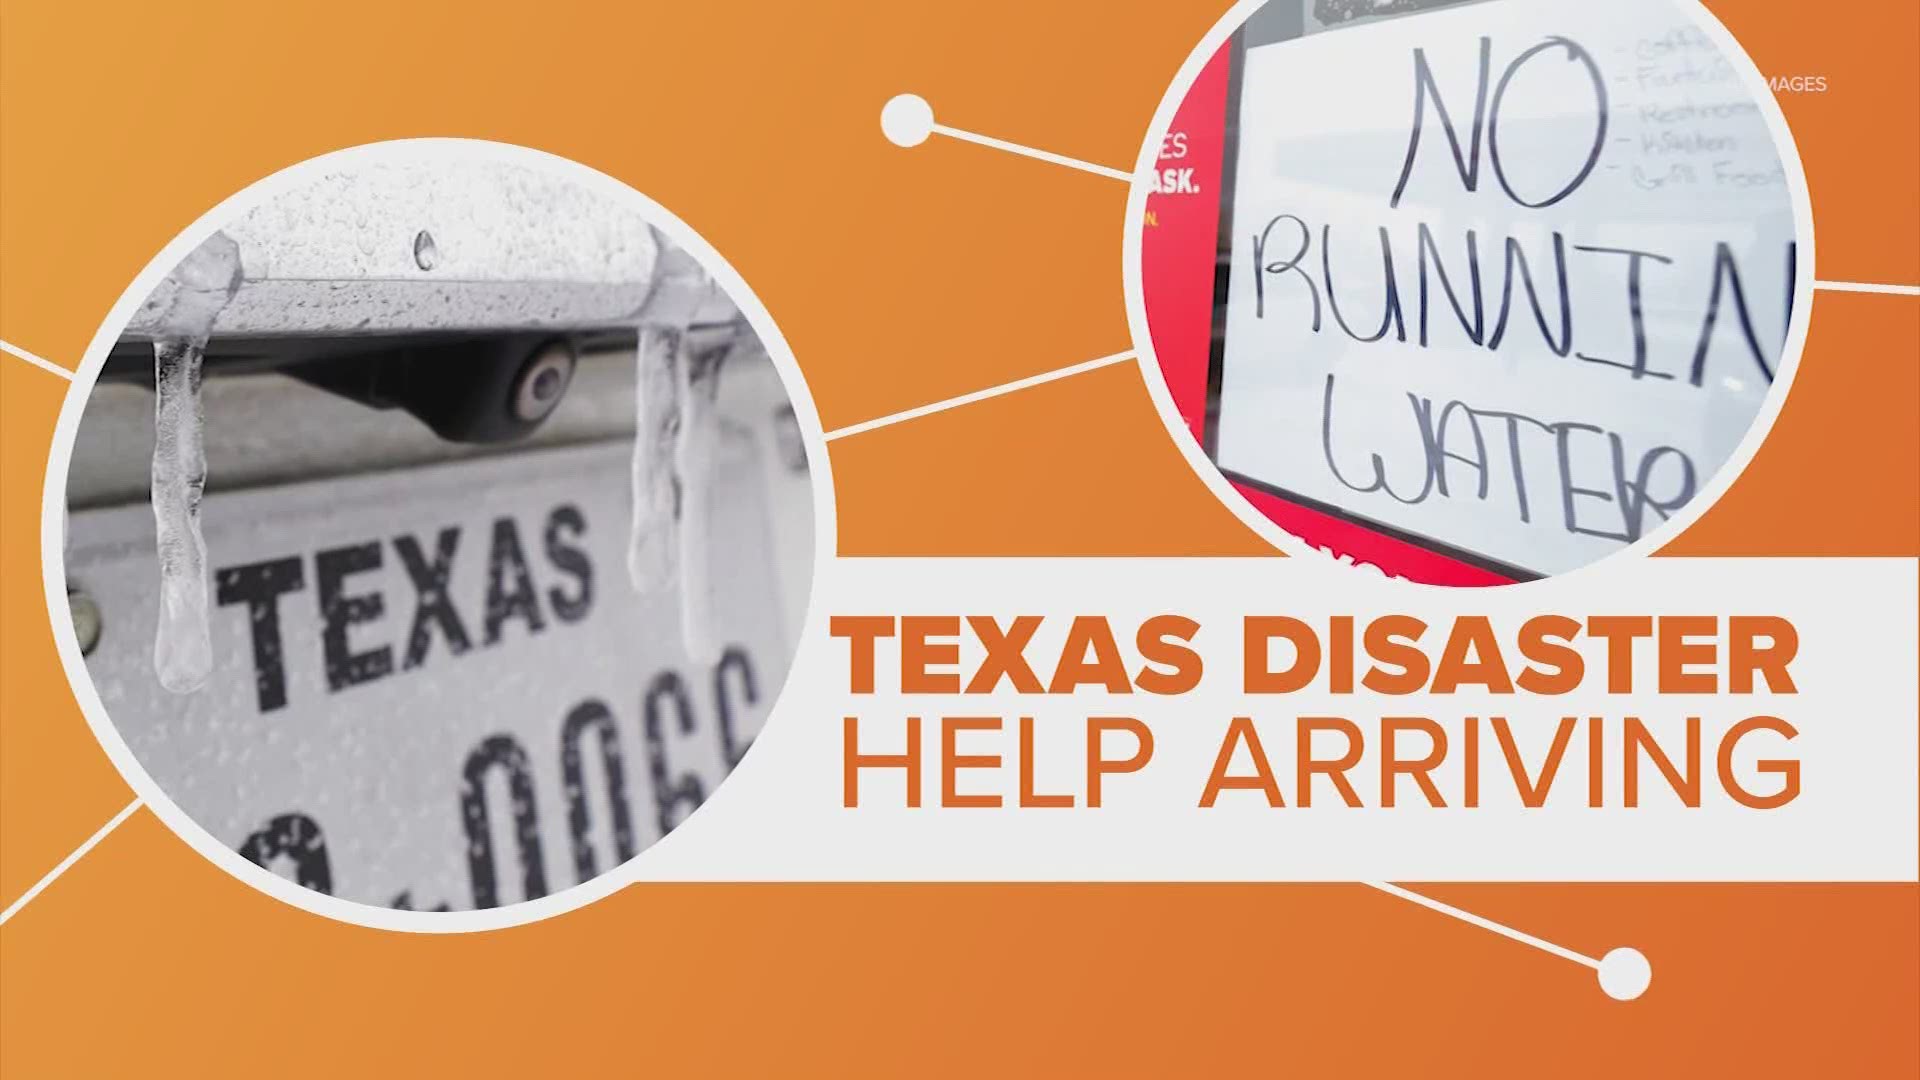 Texas is a disaster area and help is headed in, but more help could soon be available thanks to a major disaster declaration. So how does that work?